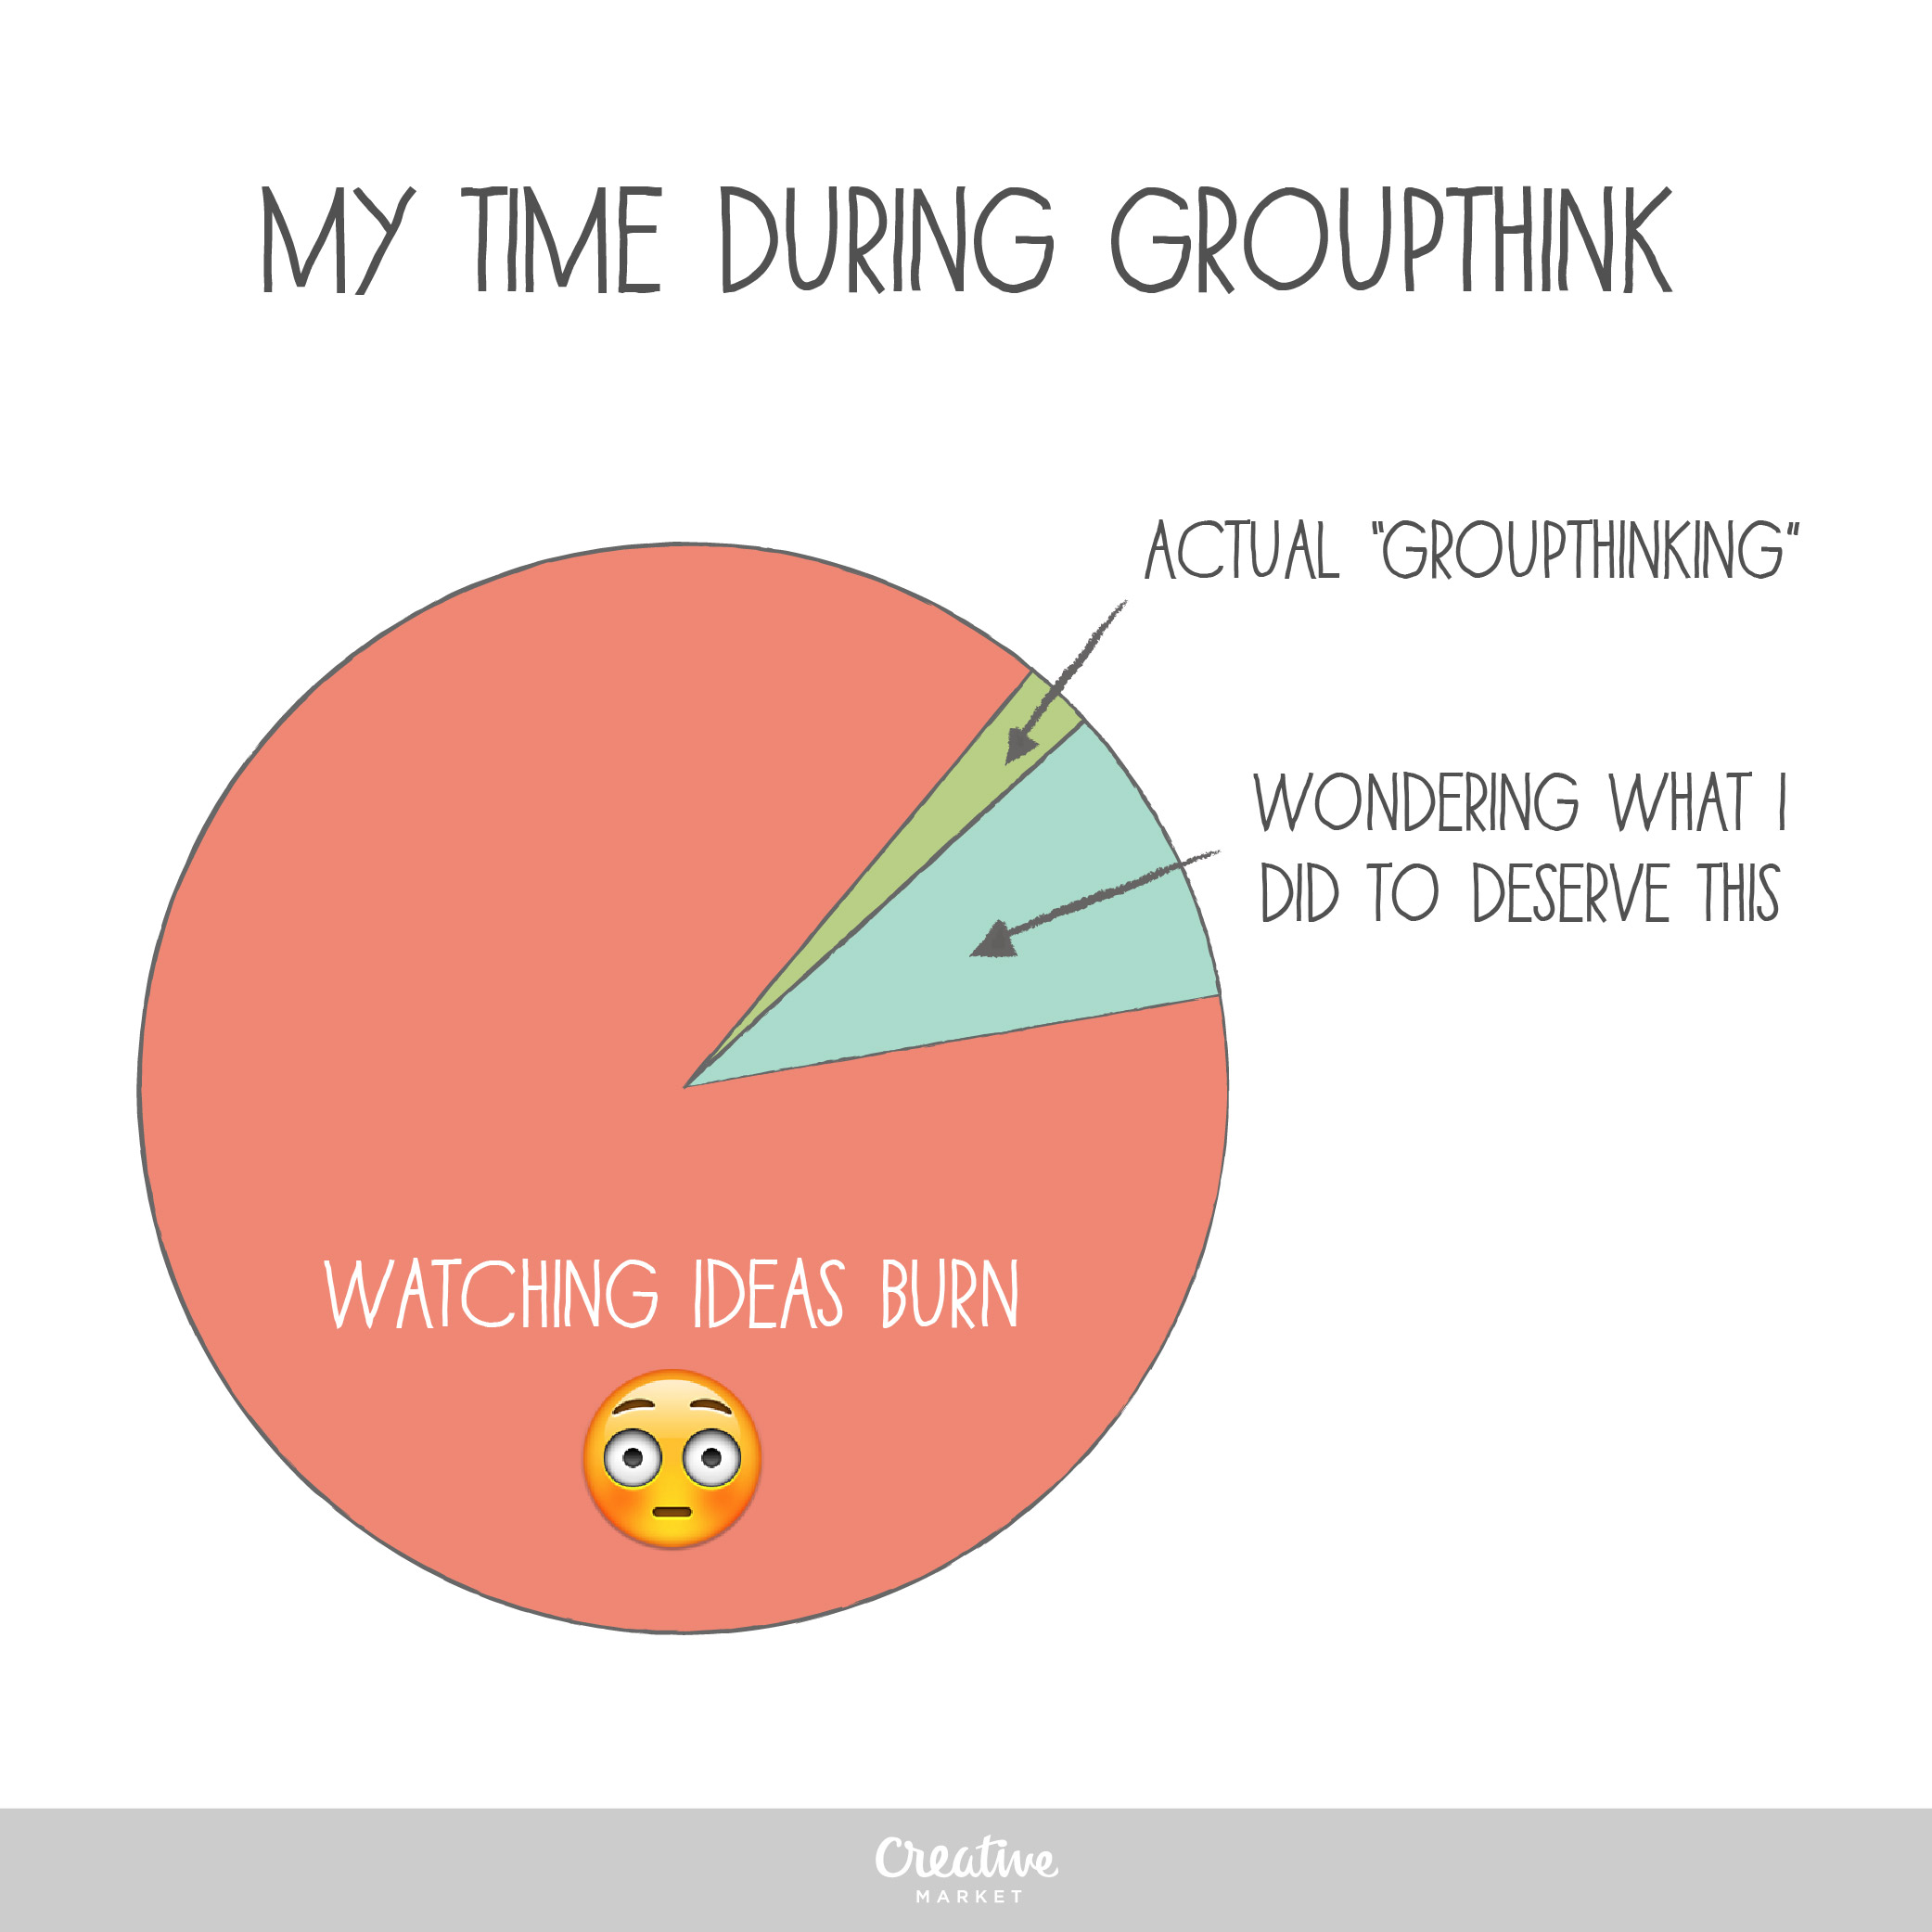 My time during a meeting, brainstorming, or groupthink.